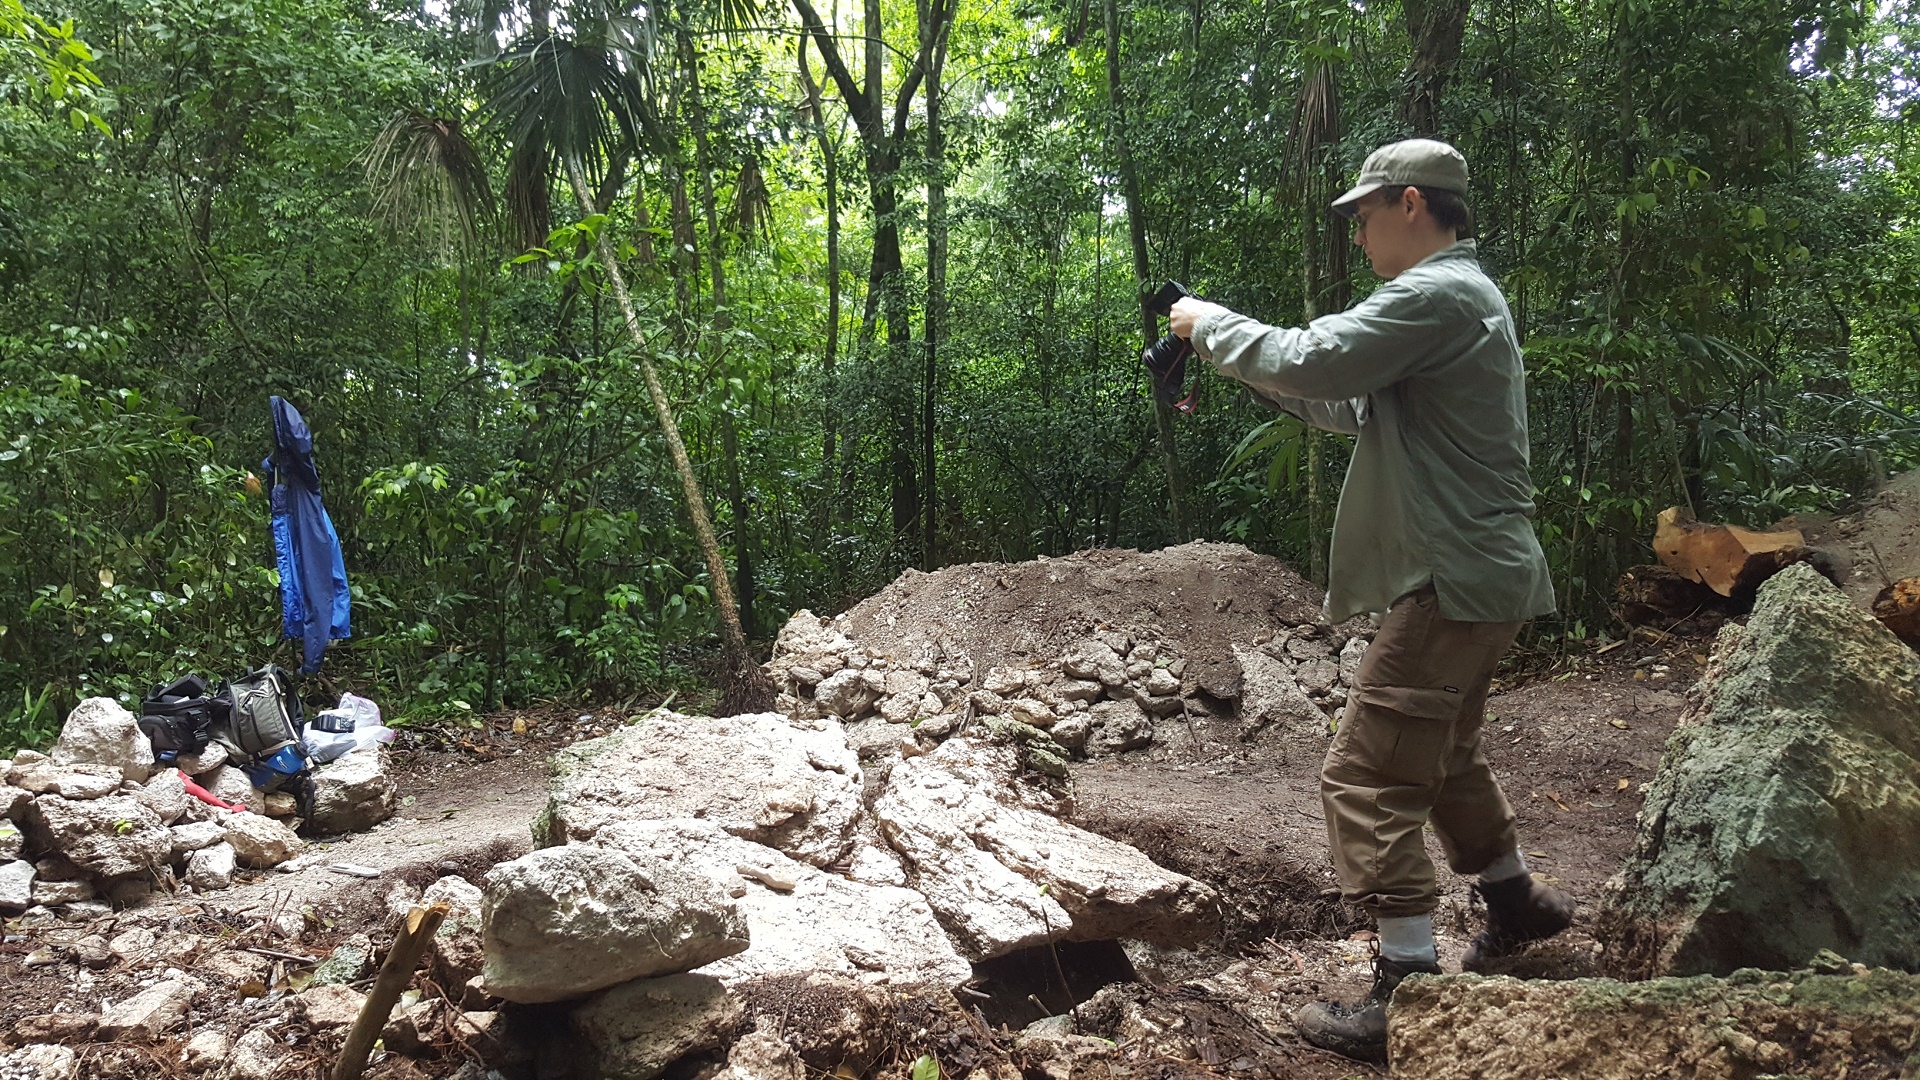 A professor at The University of Alabama photographs an archaeological site of Mayan ruins.